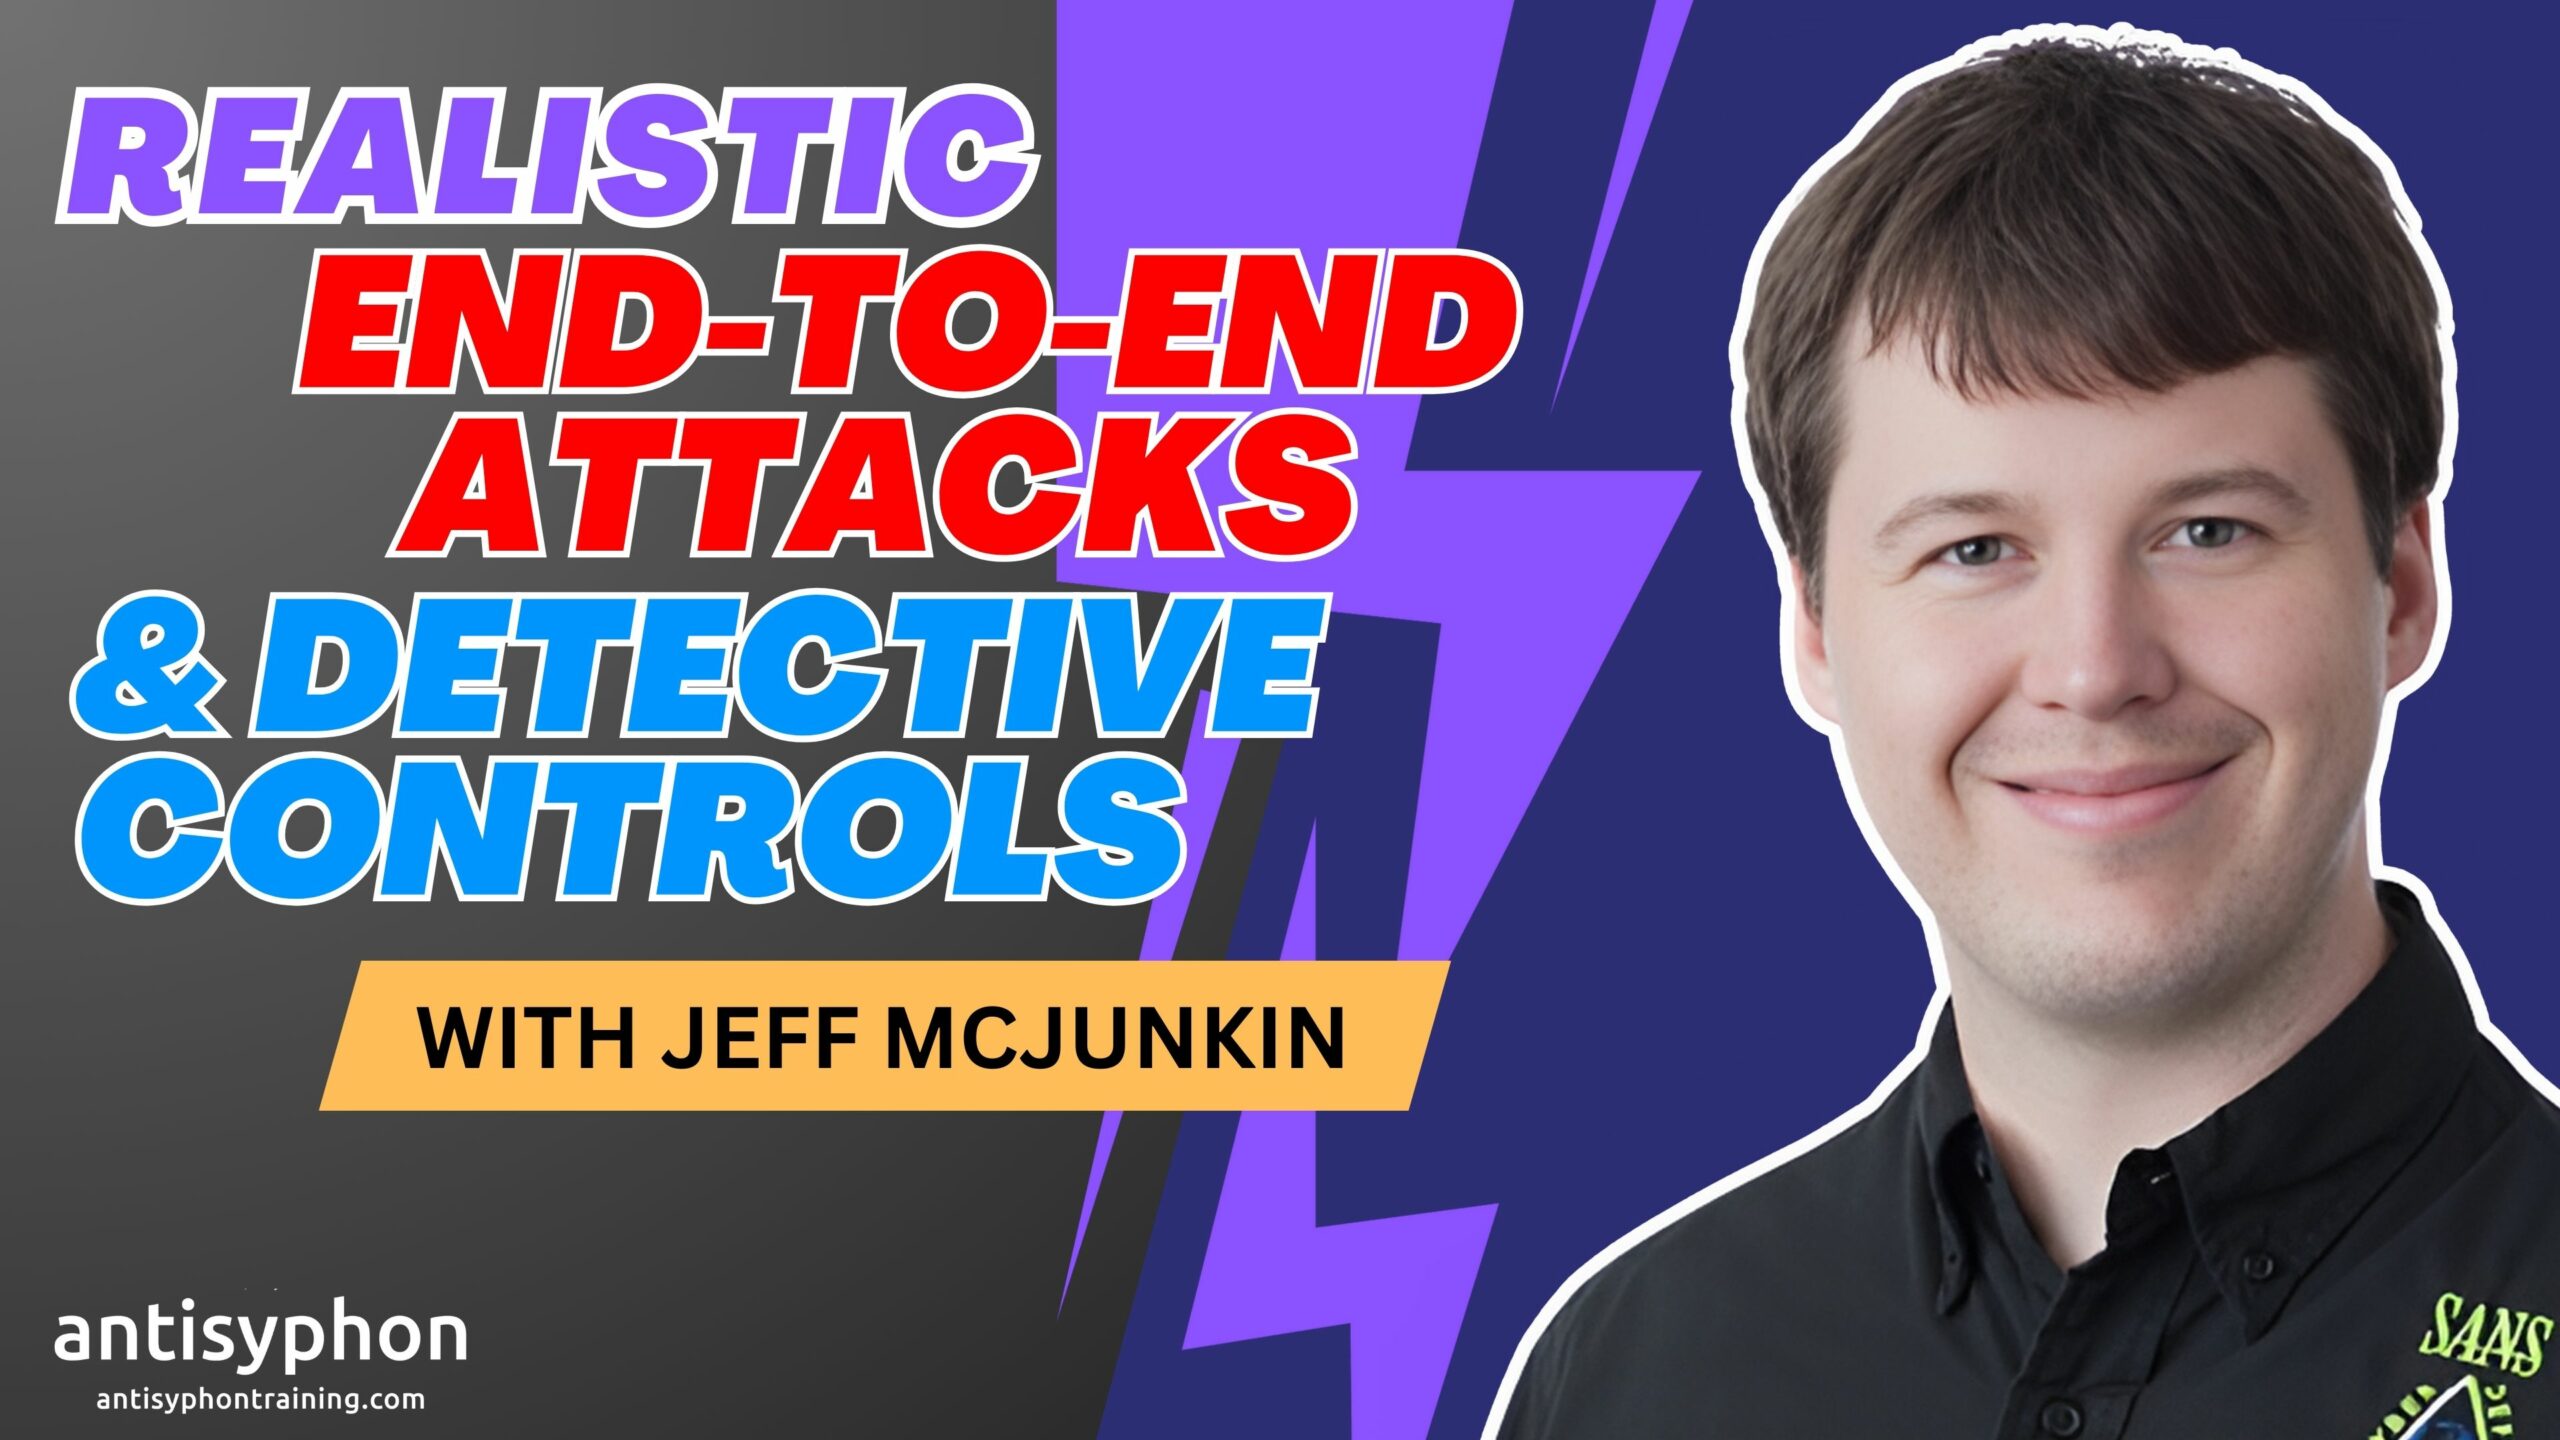 Realistic End-to-End Attacks & Detective Controls w/ Jeff McJunkin